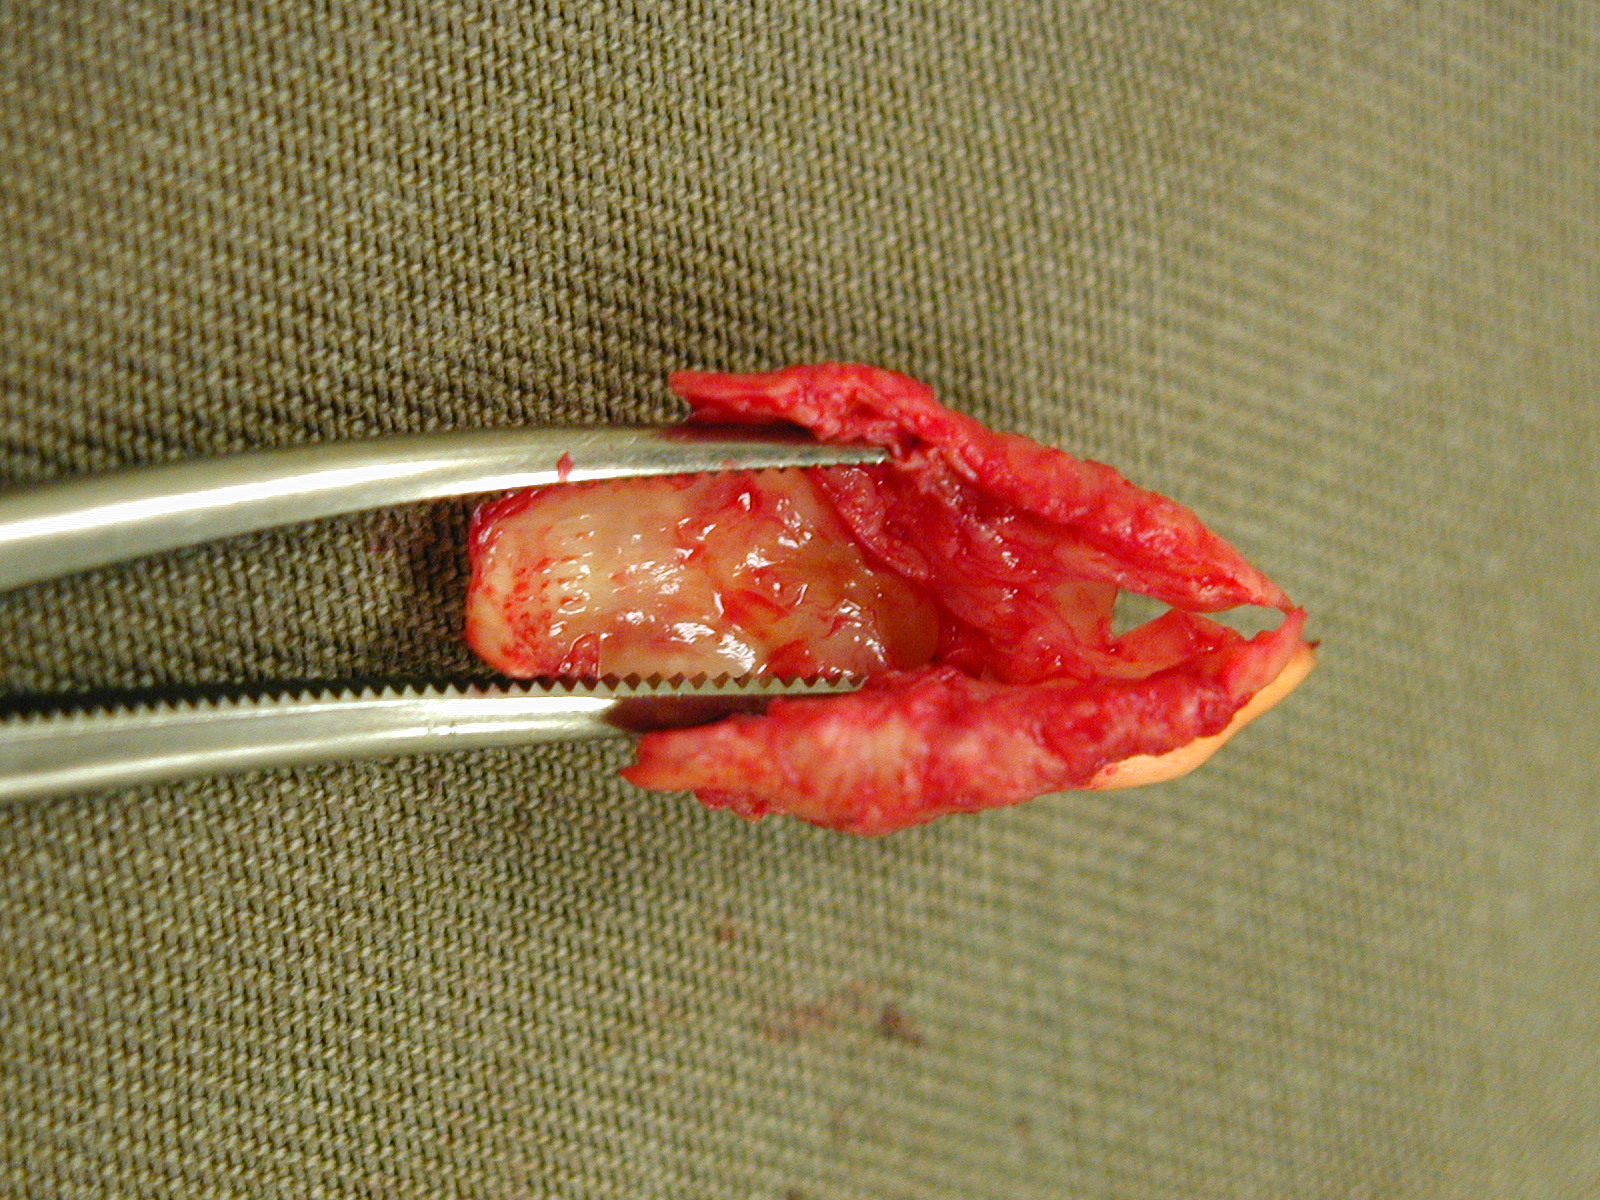 Atherosclerotic Plaque. This is a piece of fibrous plaque removed during carotid endarterectomy. Such lesions are most commonly found at the carotid bifurcation. They are caused by infection of the intimal-medial layers, resulting in an accumulation of lipids, macrophages, and fibrous tissue. Over time, they may develop into necrosis, ulceration, or hemorrhage.